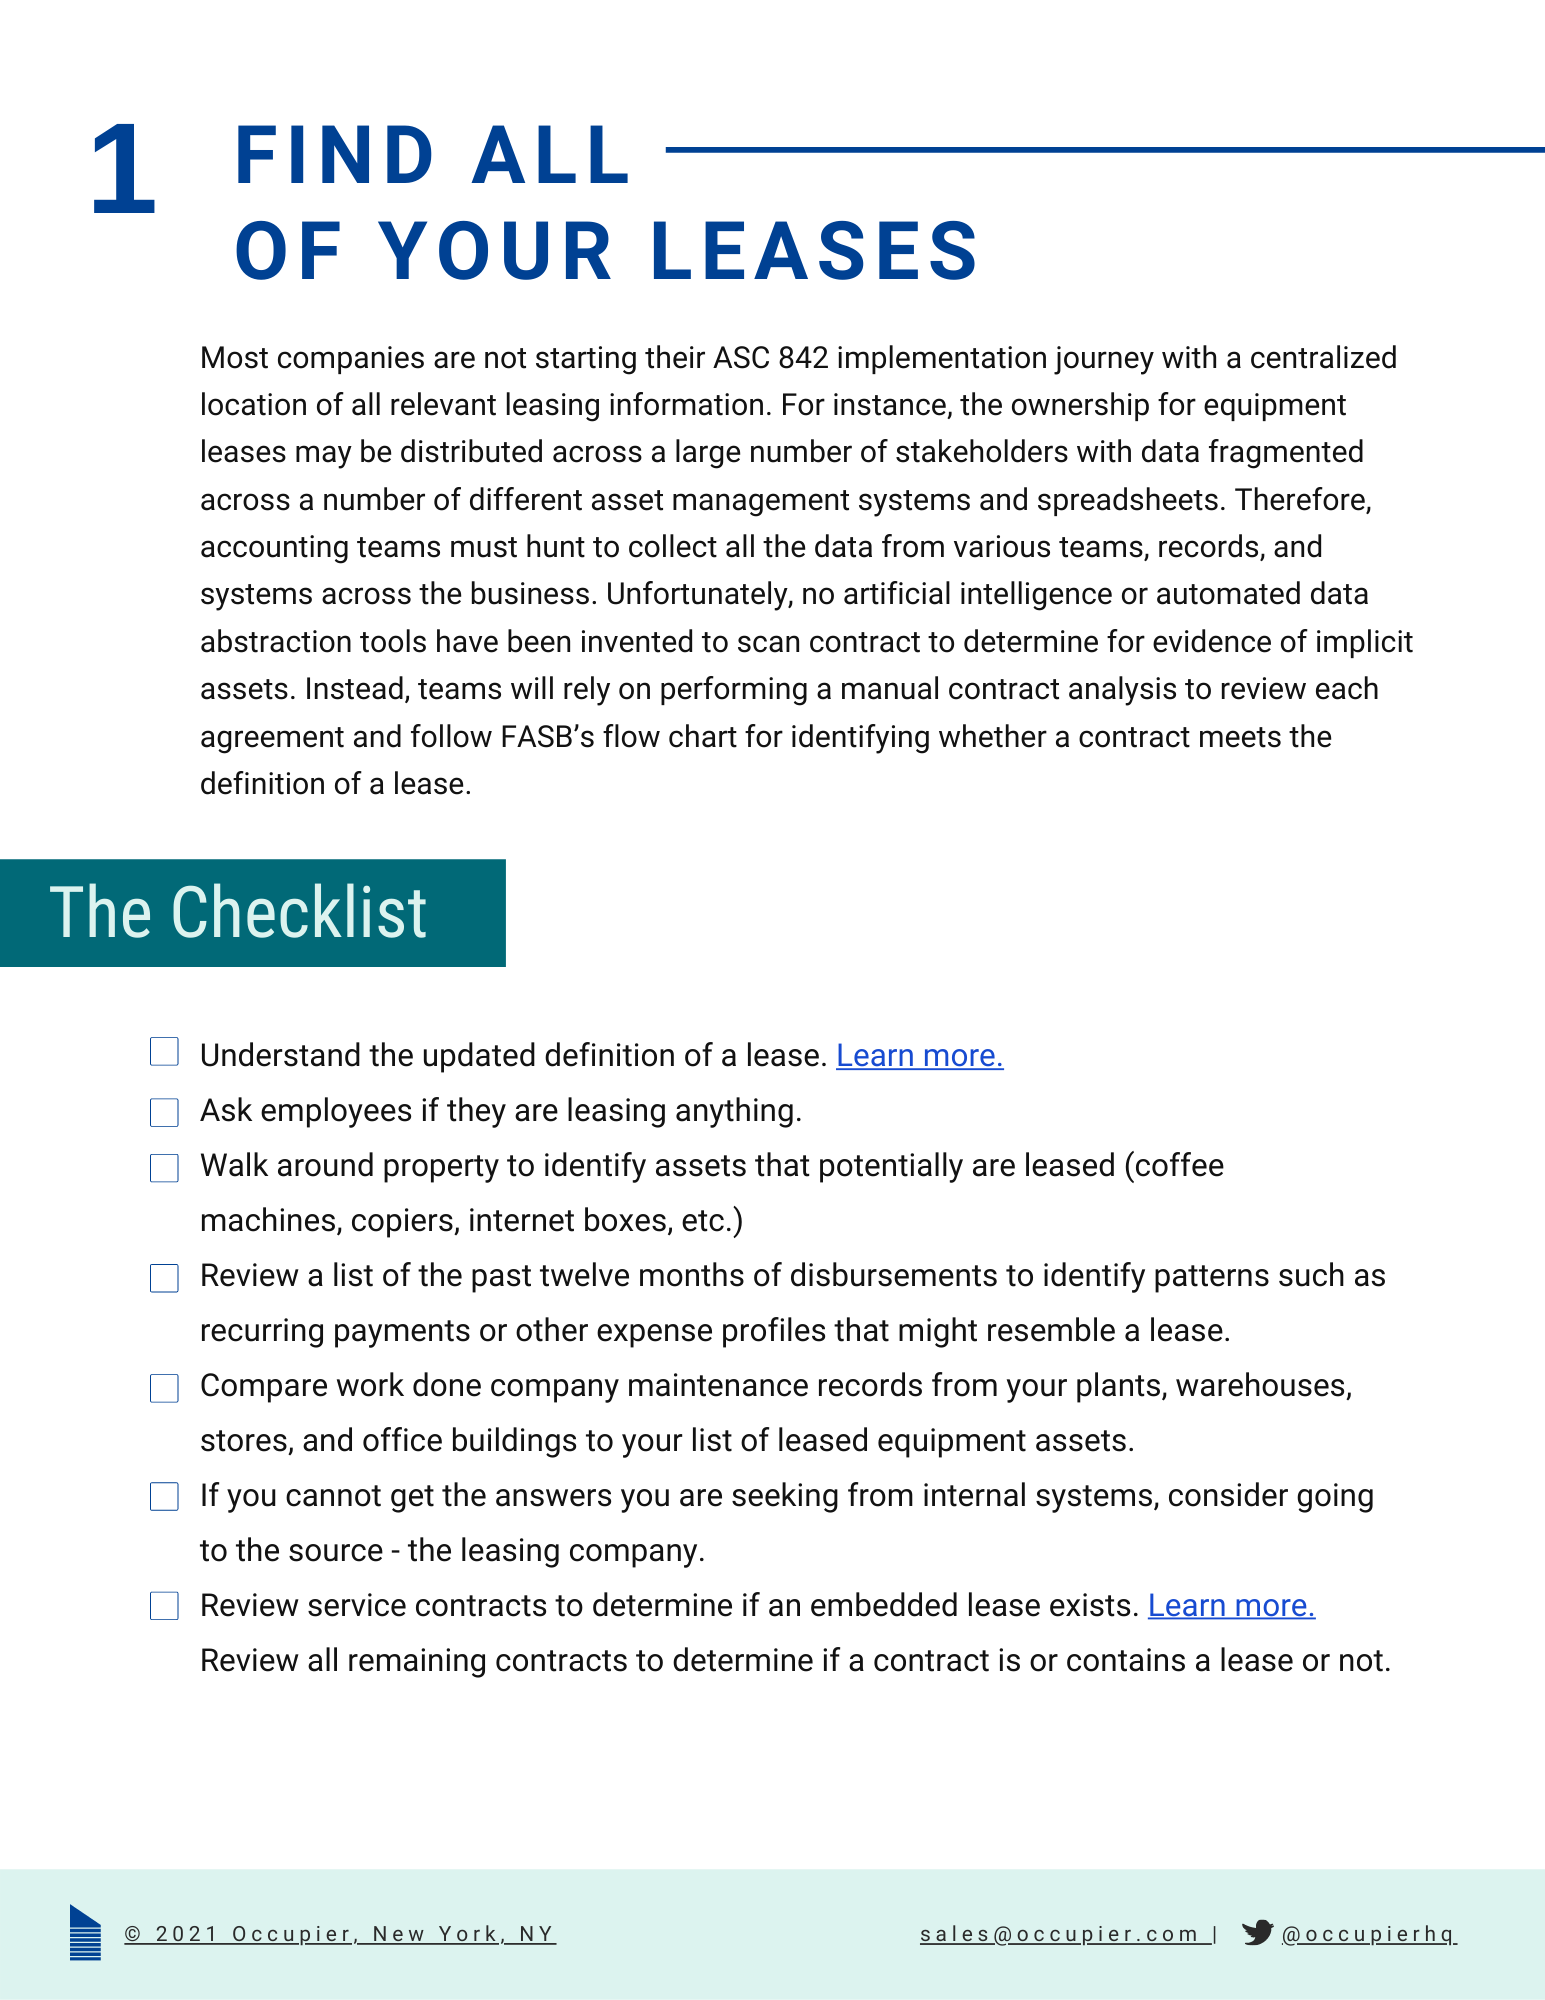 Find all of your leases